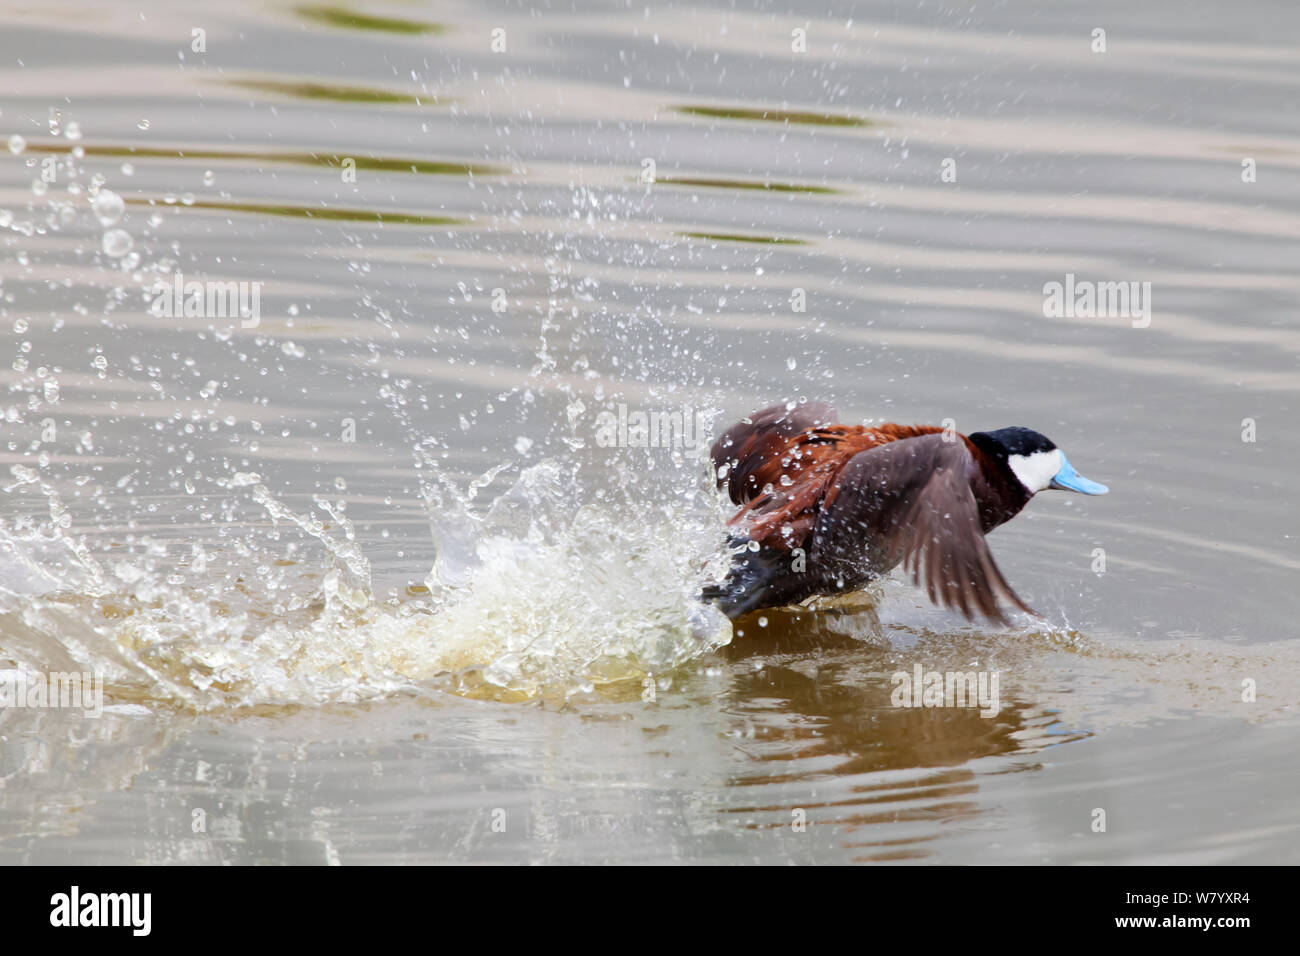 Ruddy duck (Oxyura jamaicensis jamaicensis) male taking off, Xochimilco wetlands, Mexico City, Mexico. August. Stock Photo